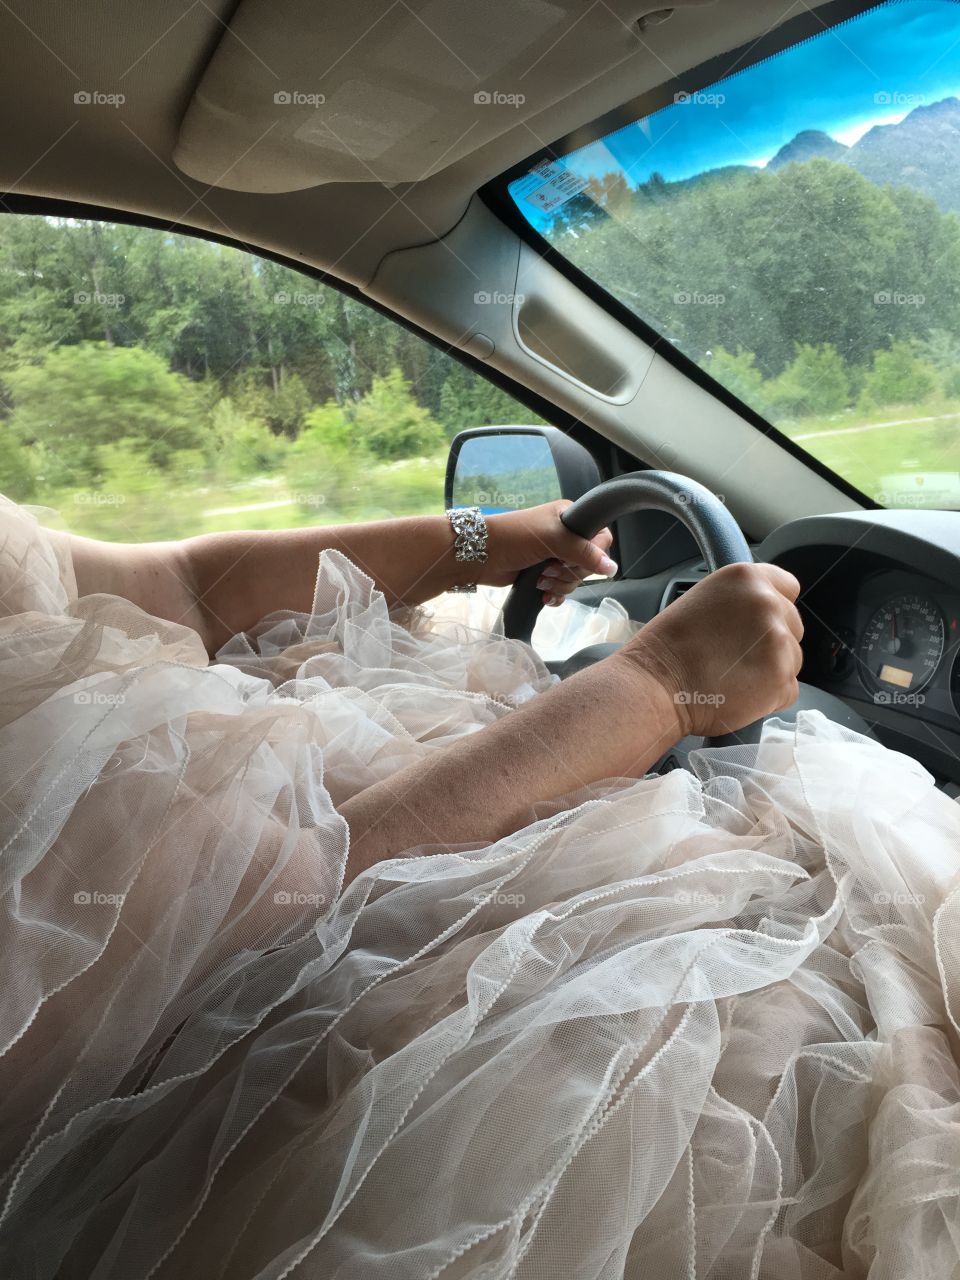 The bride drives herself 